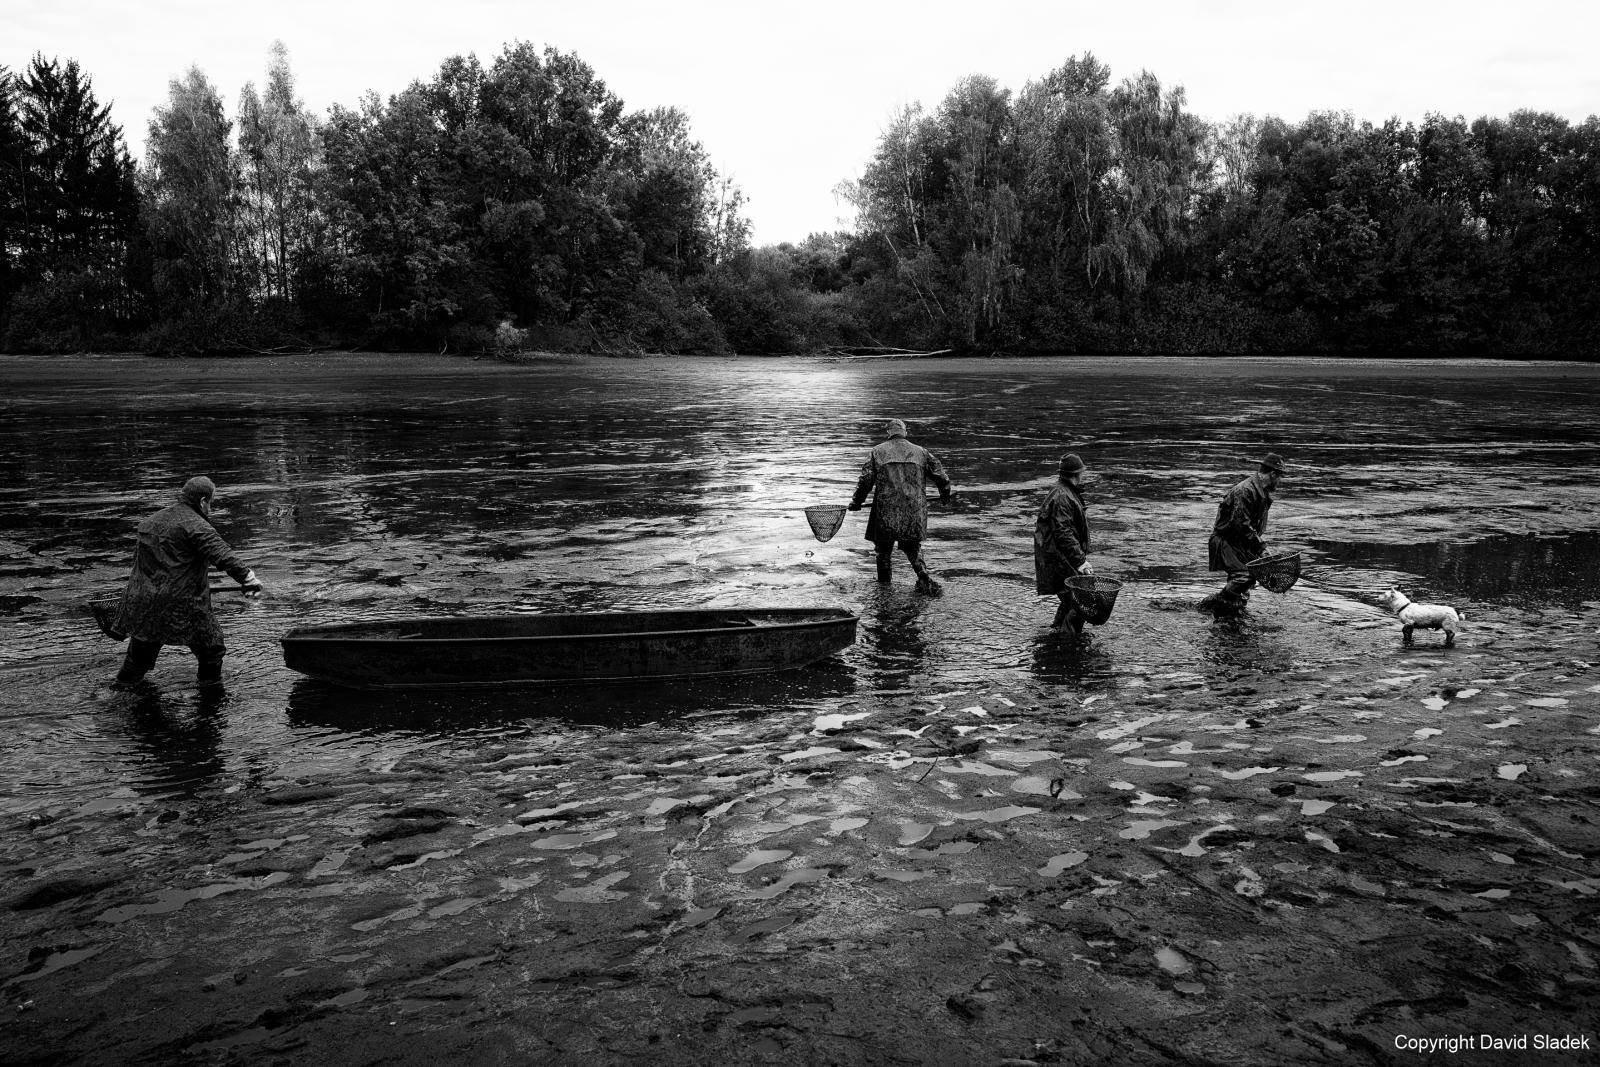 Fish harvest in South Bohemia has kicked off to bring carp on Czech Christmas tables